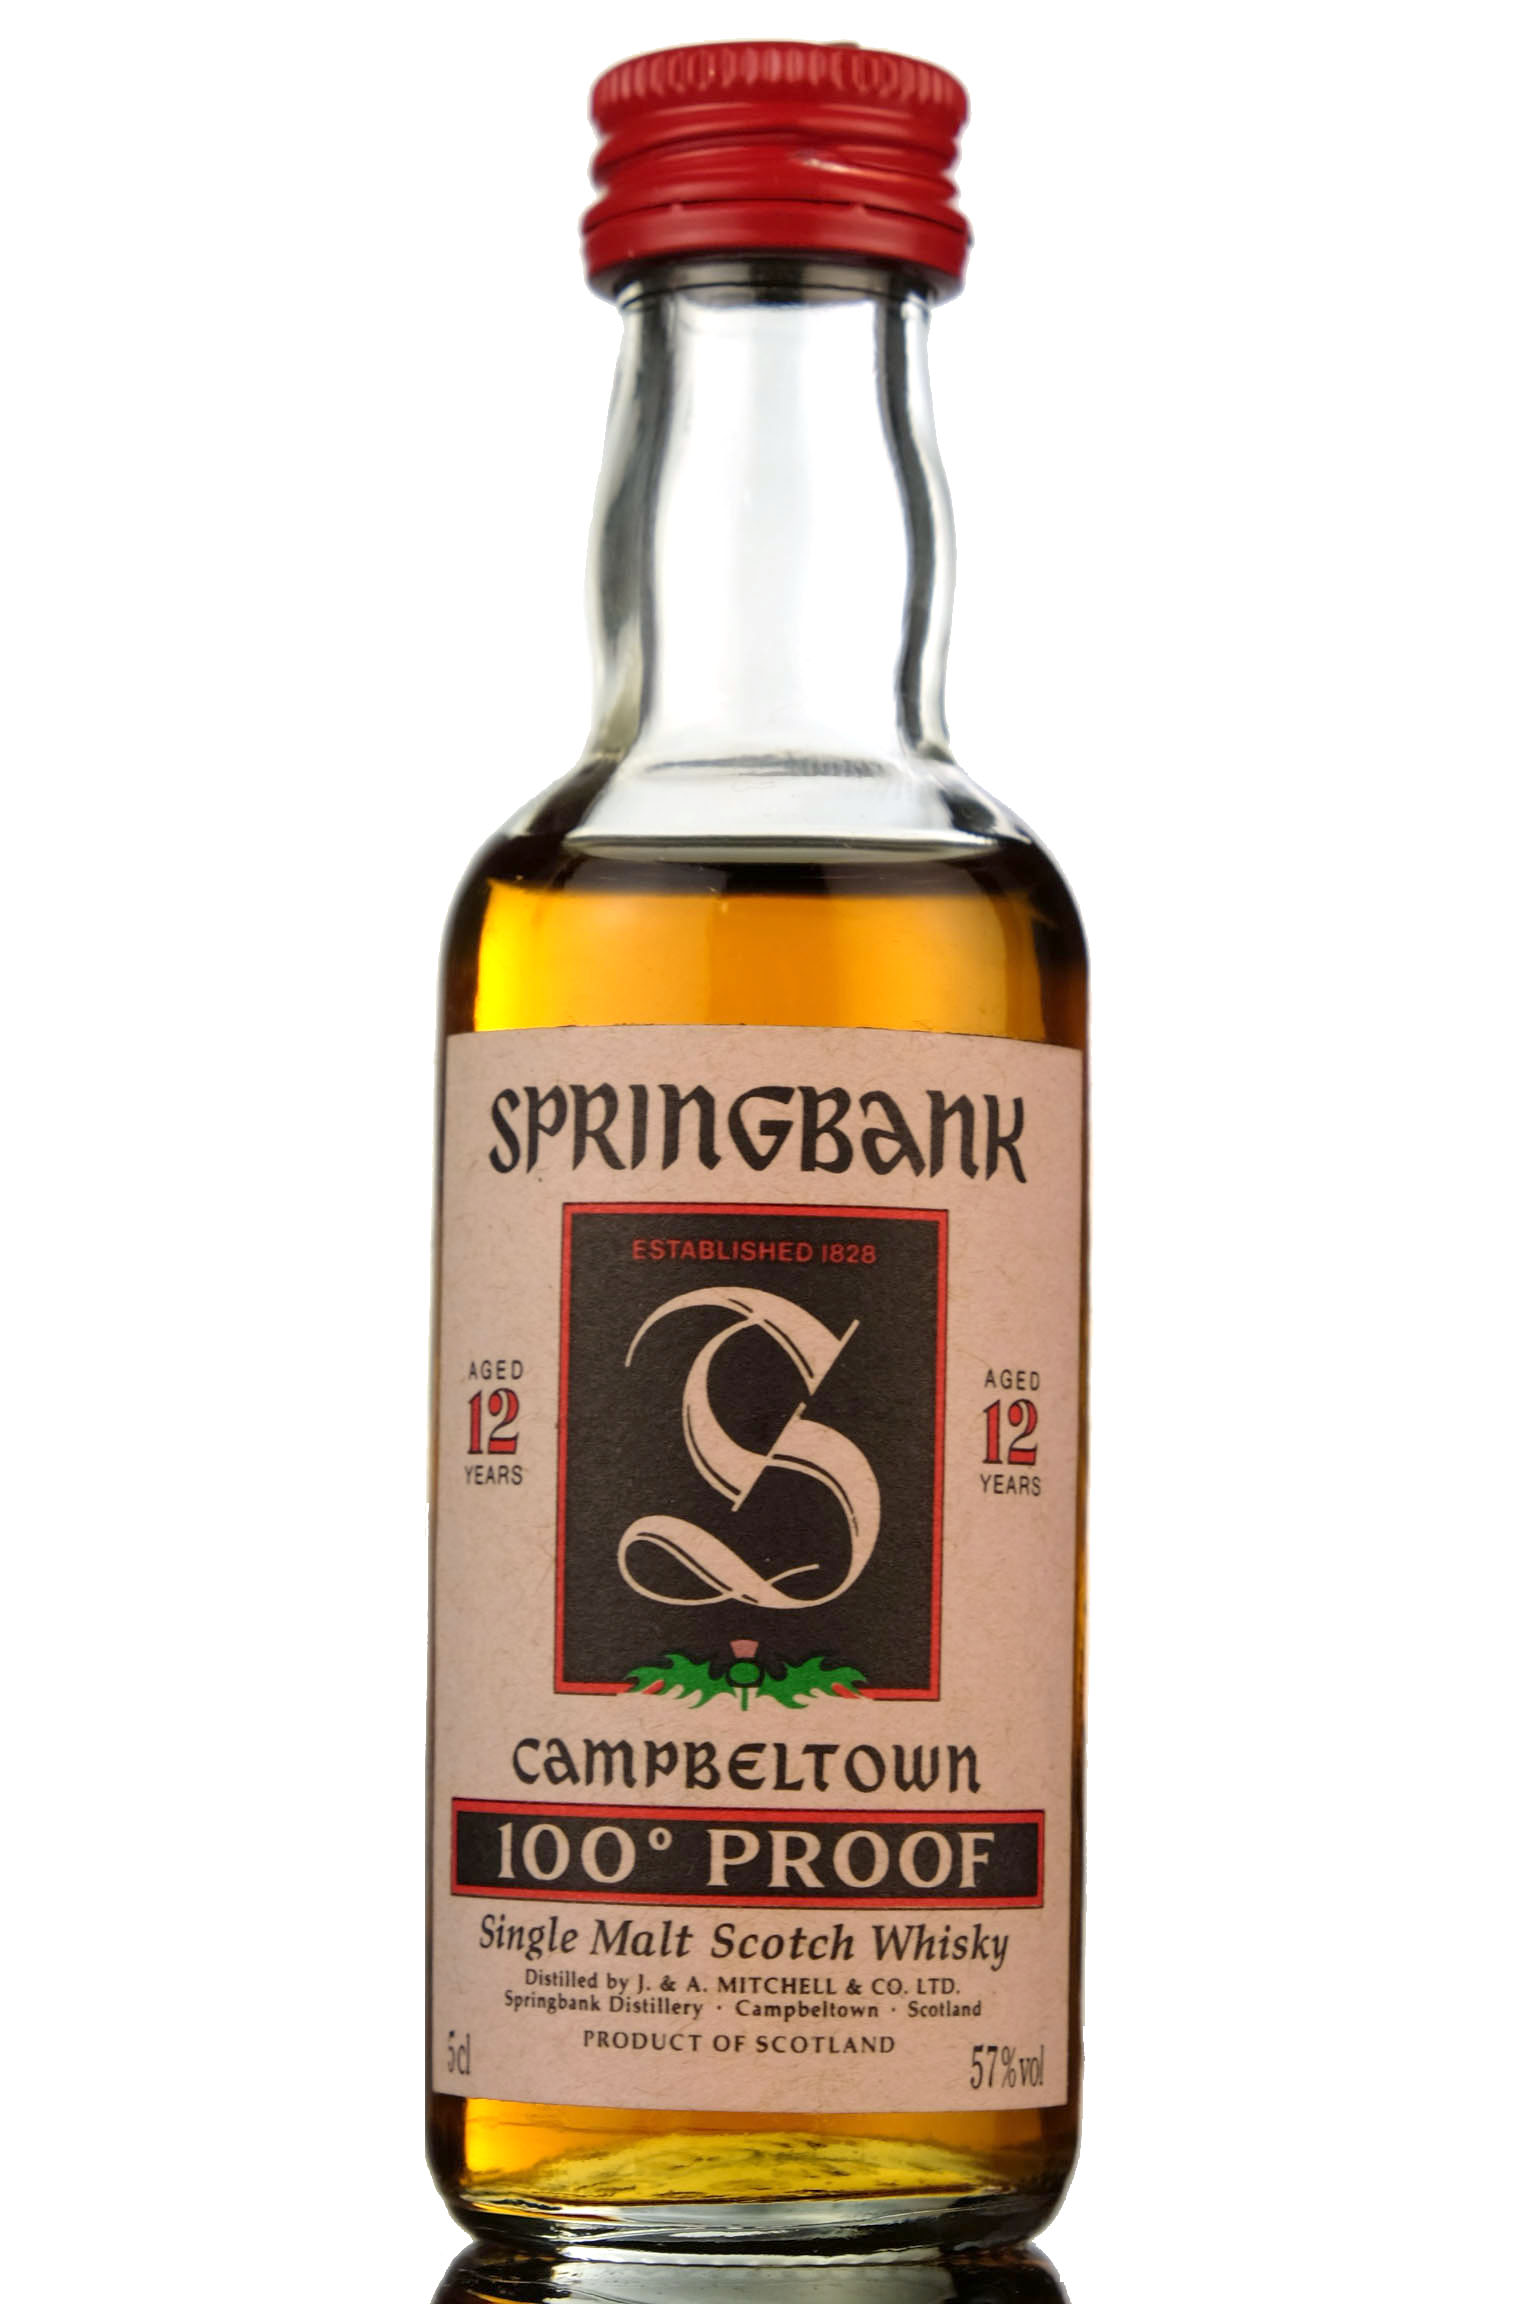 Springbank 12 Year Old - 100 Proof Miniature